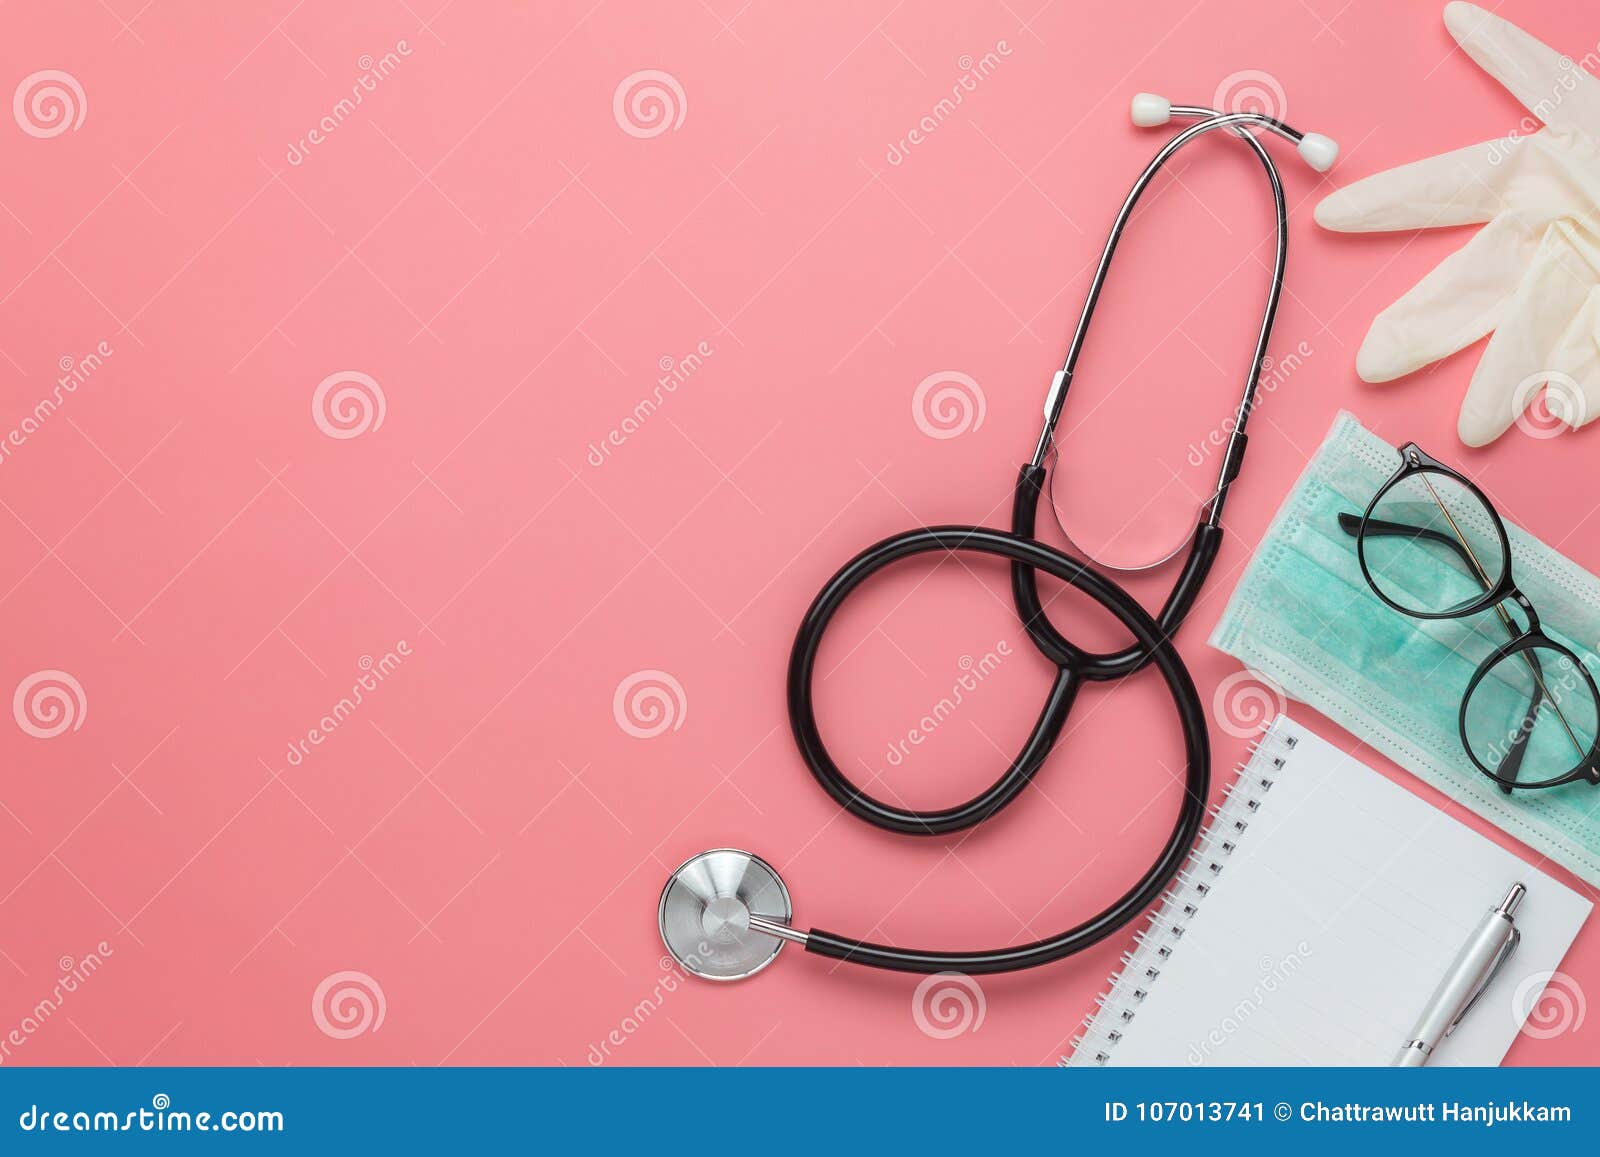 flat lay aerial of accessories healthcare & medical background concept.